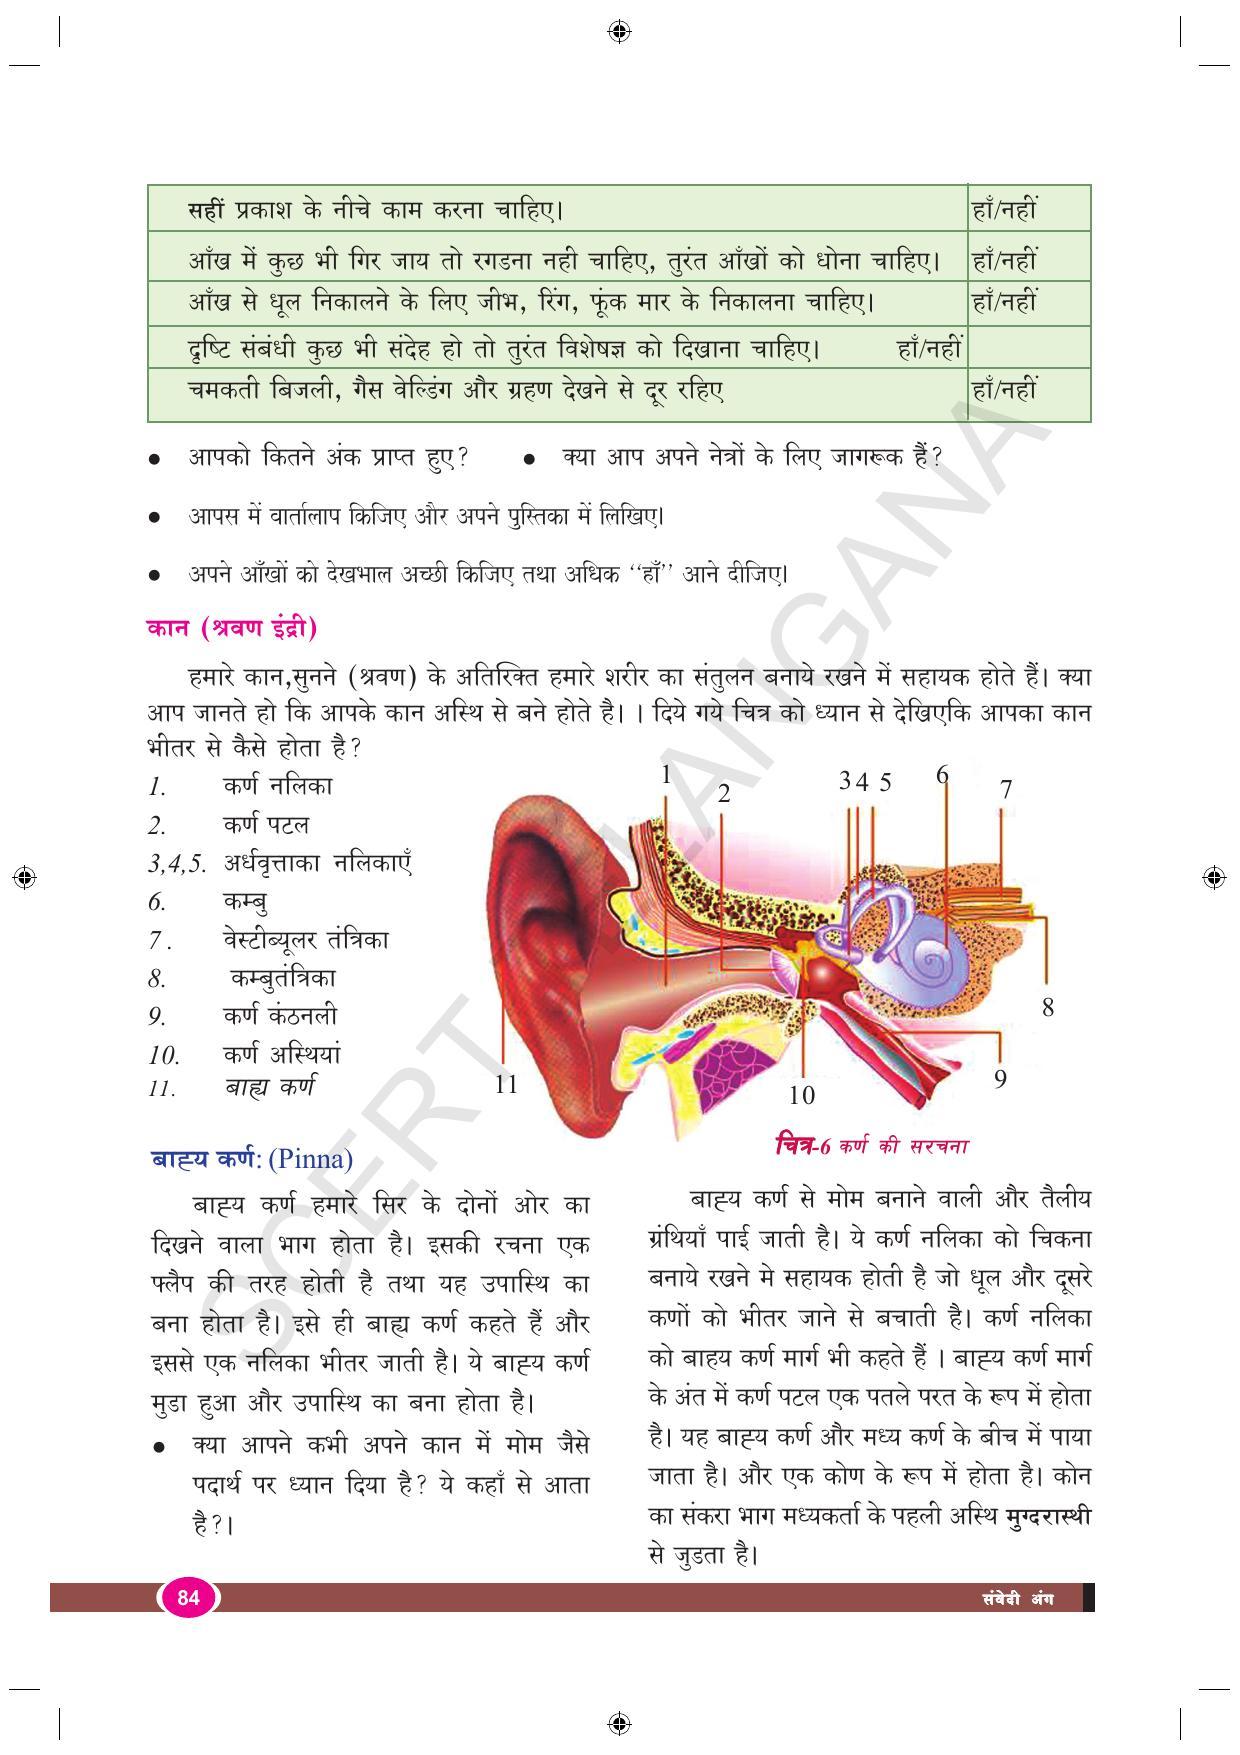 TS SCERT Class 9 Biological Science (Hindi Medium) Text Book - Page 96